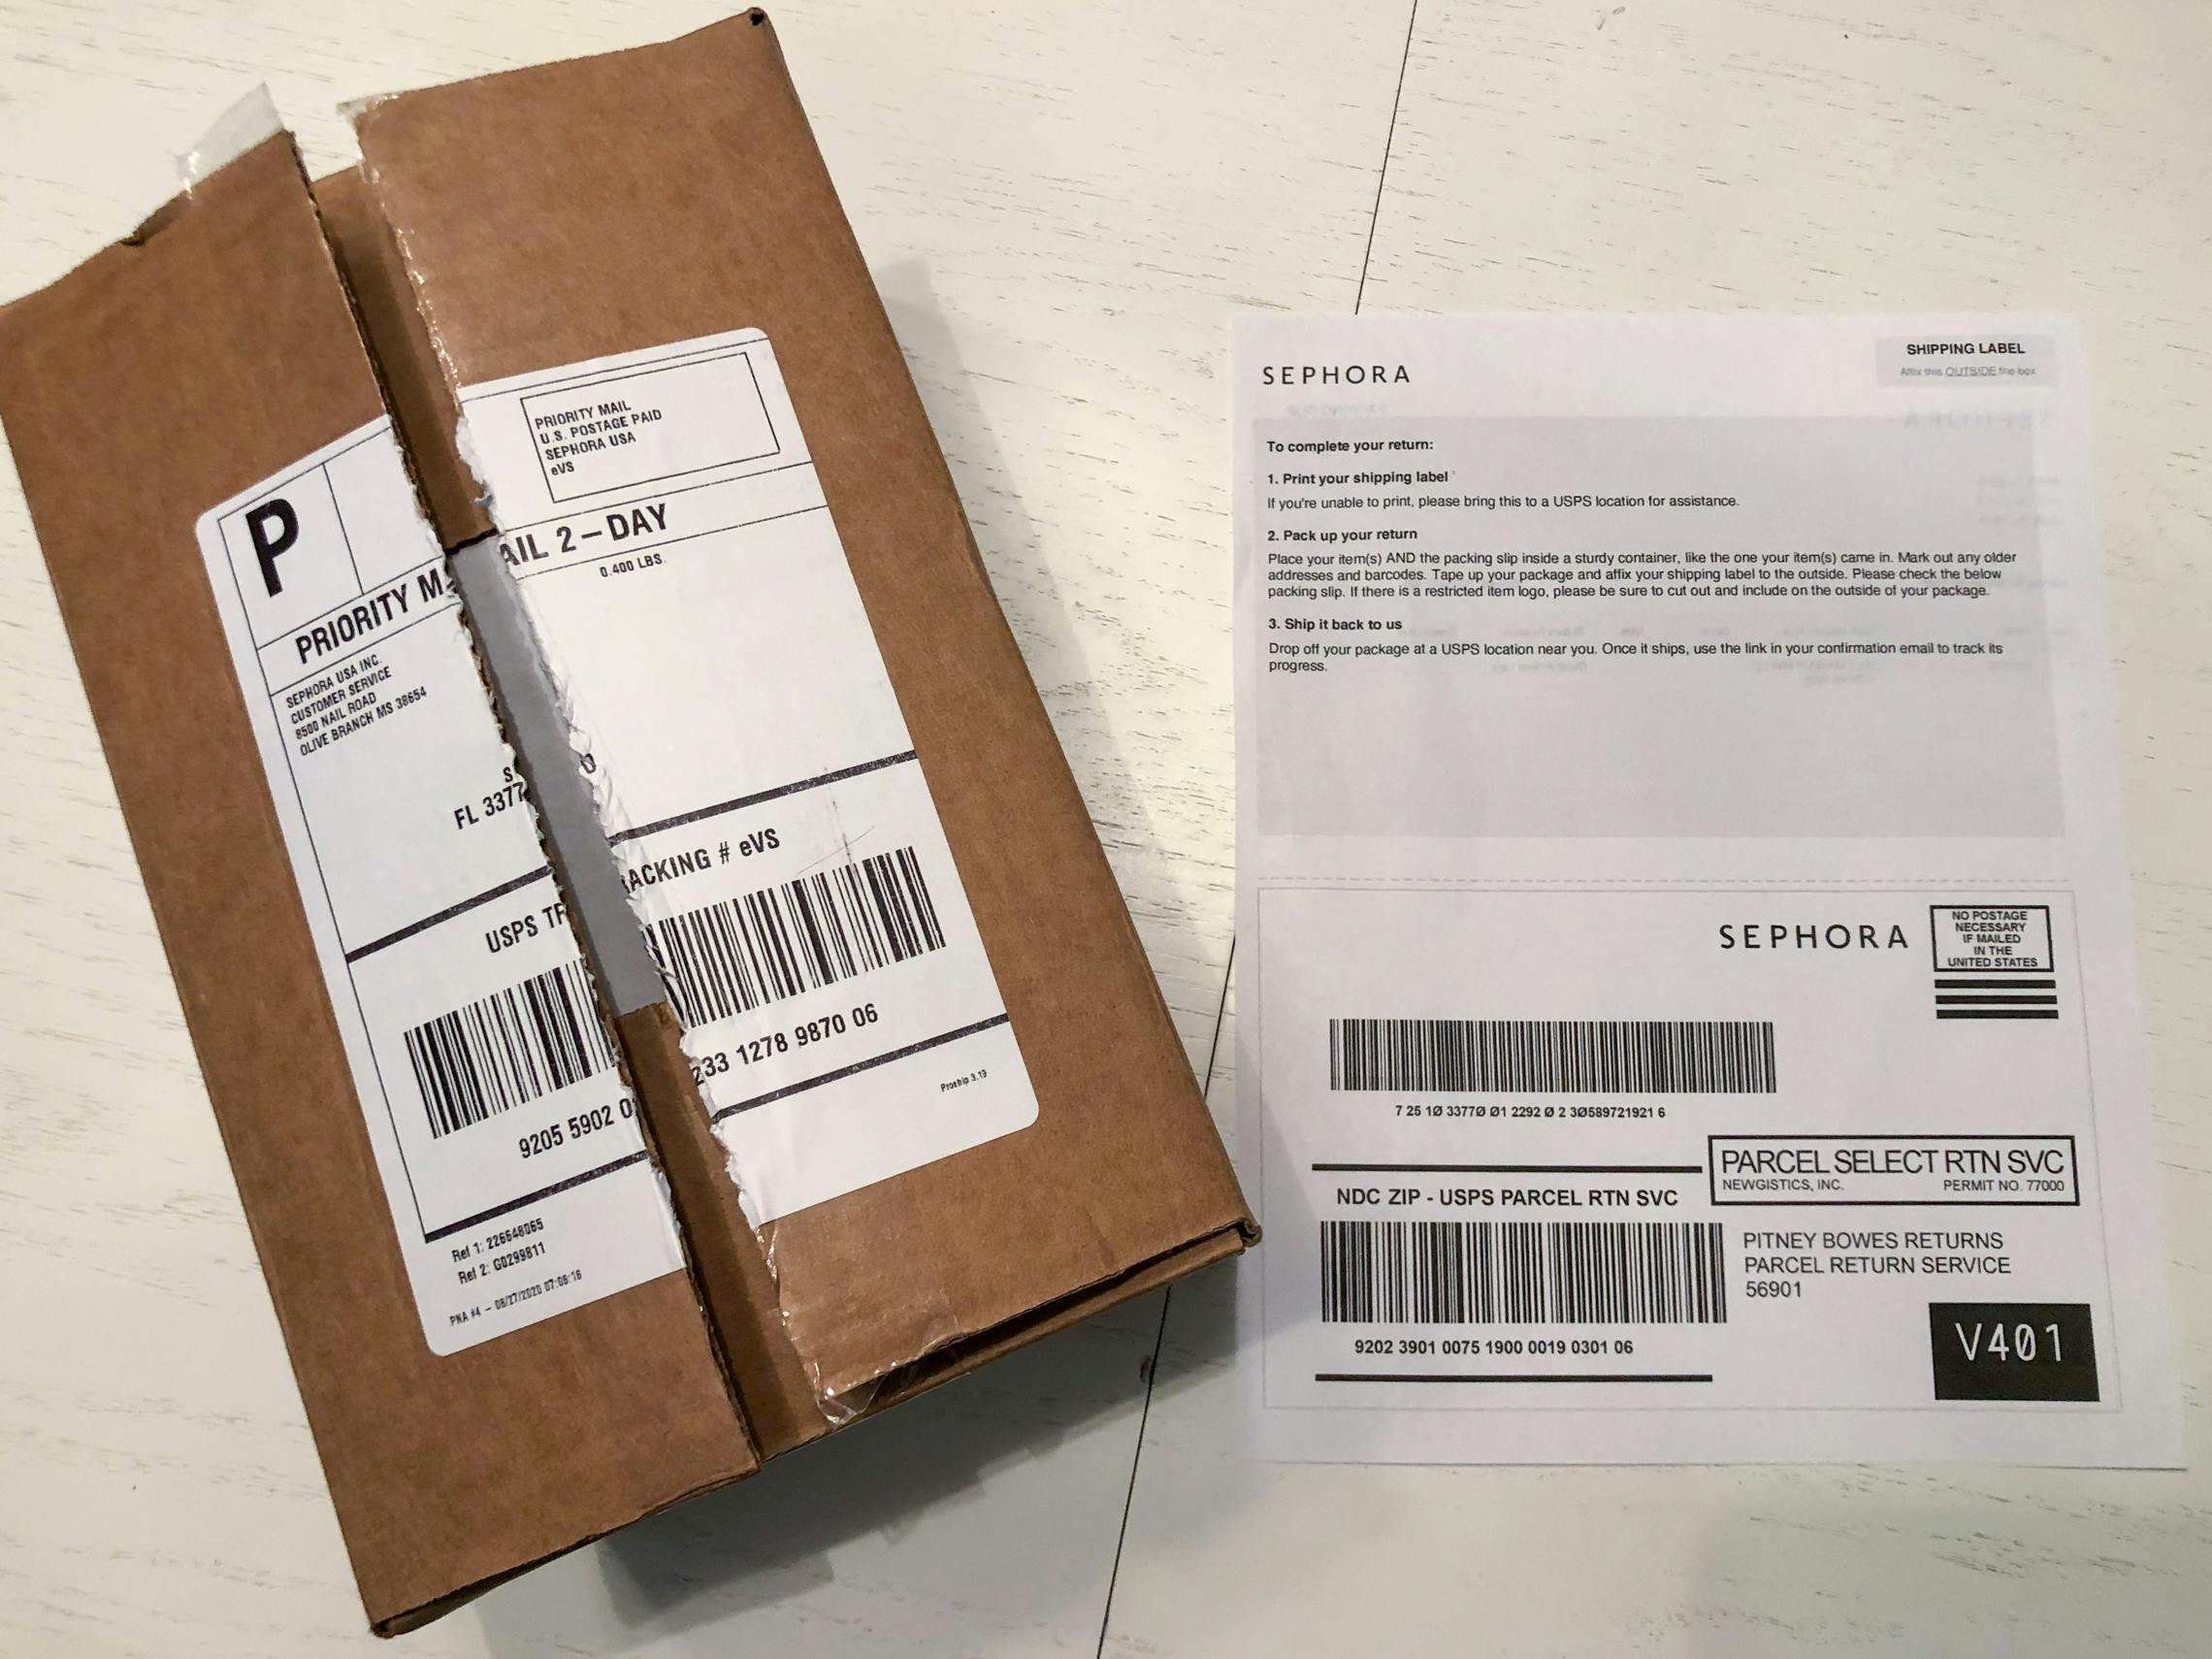 Shipping box and printed out return shipping label